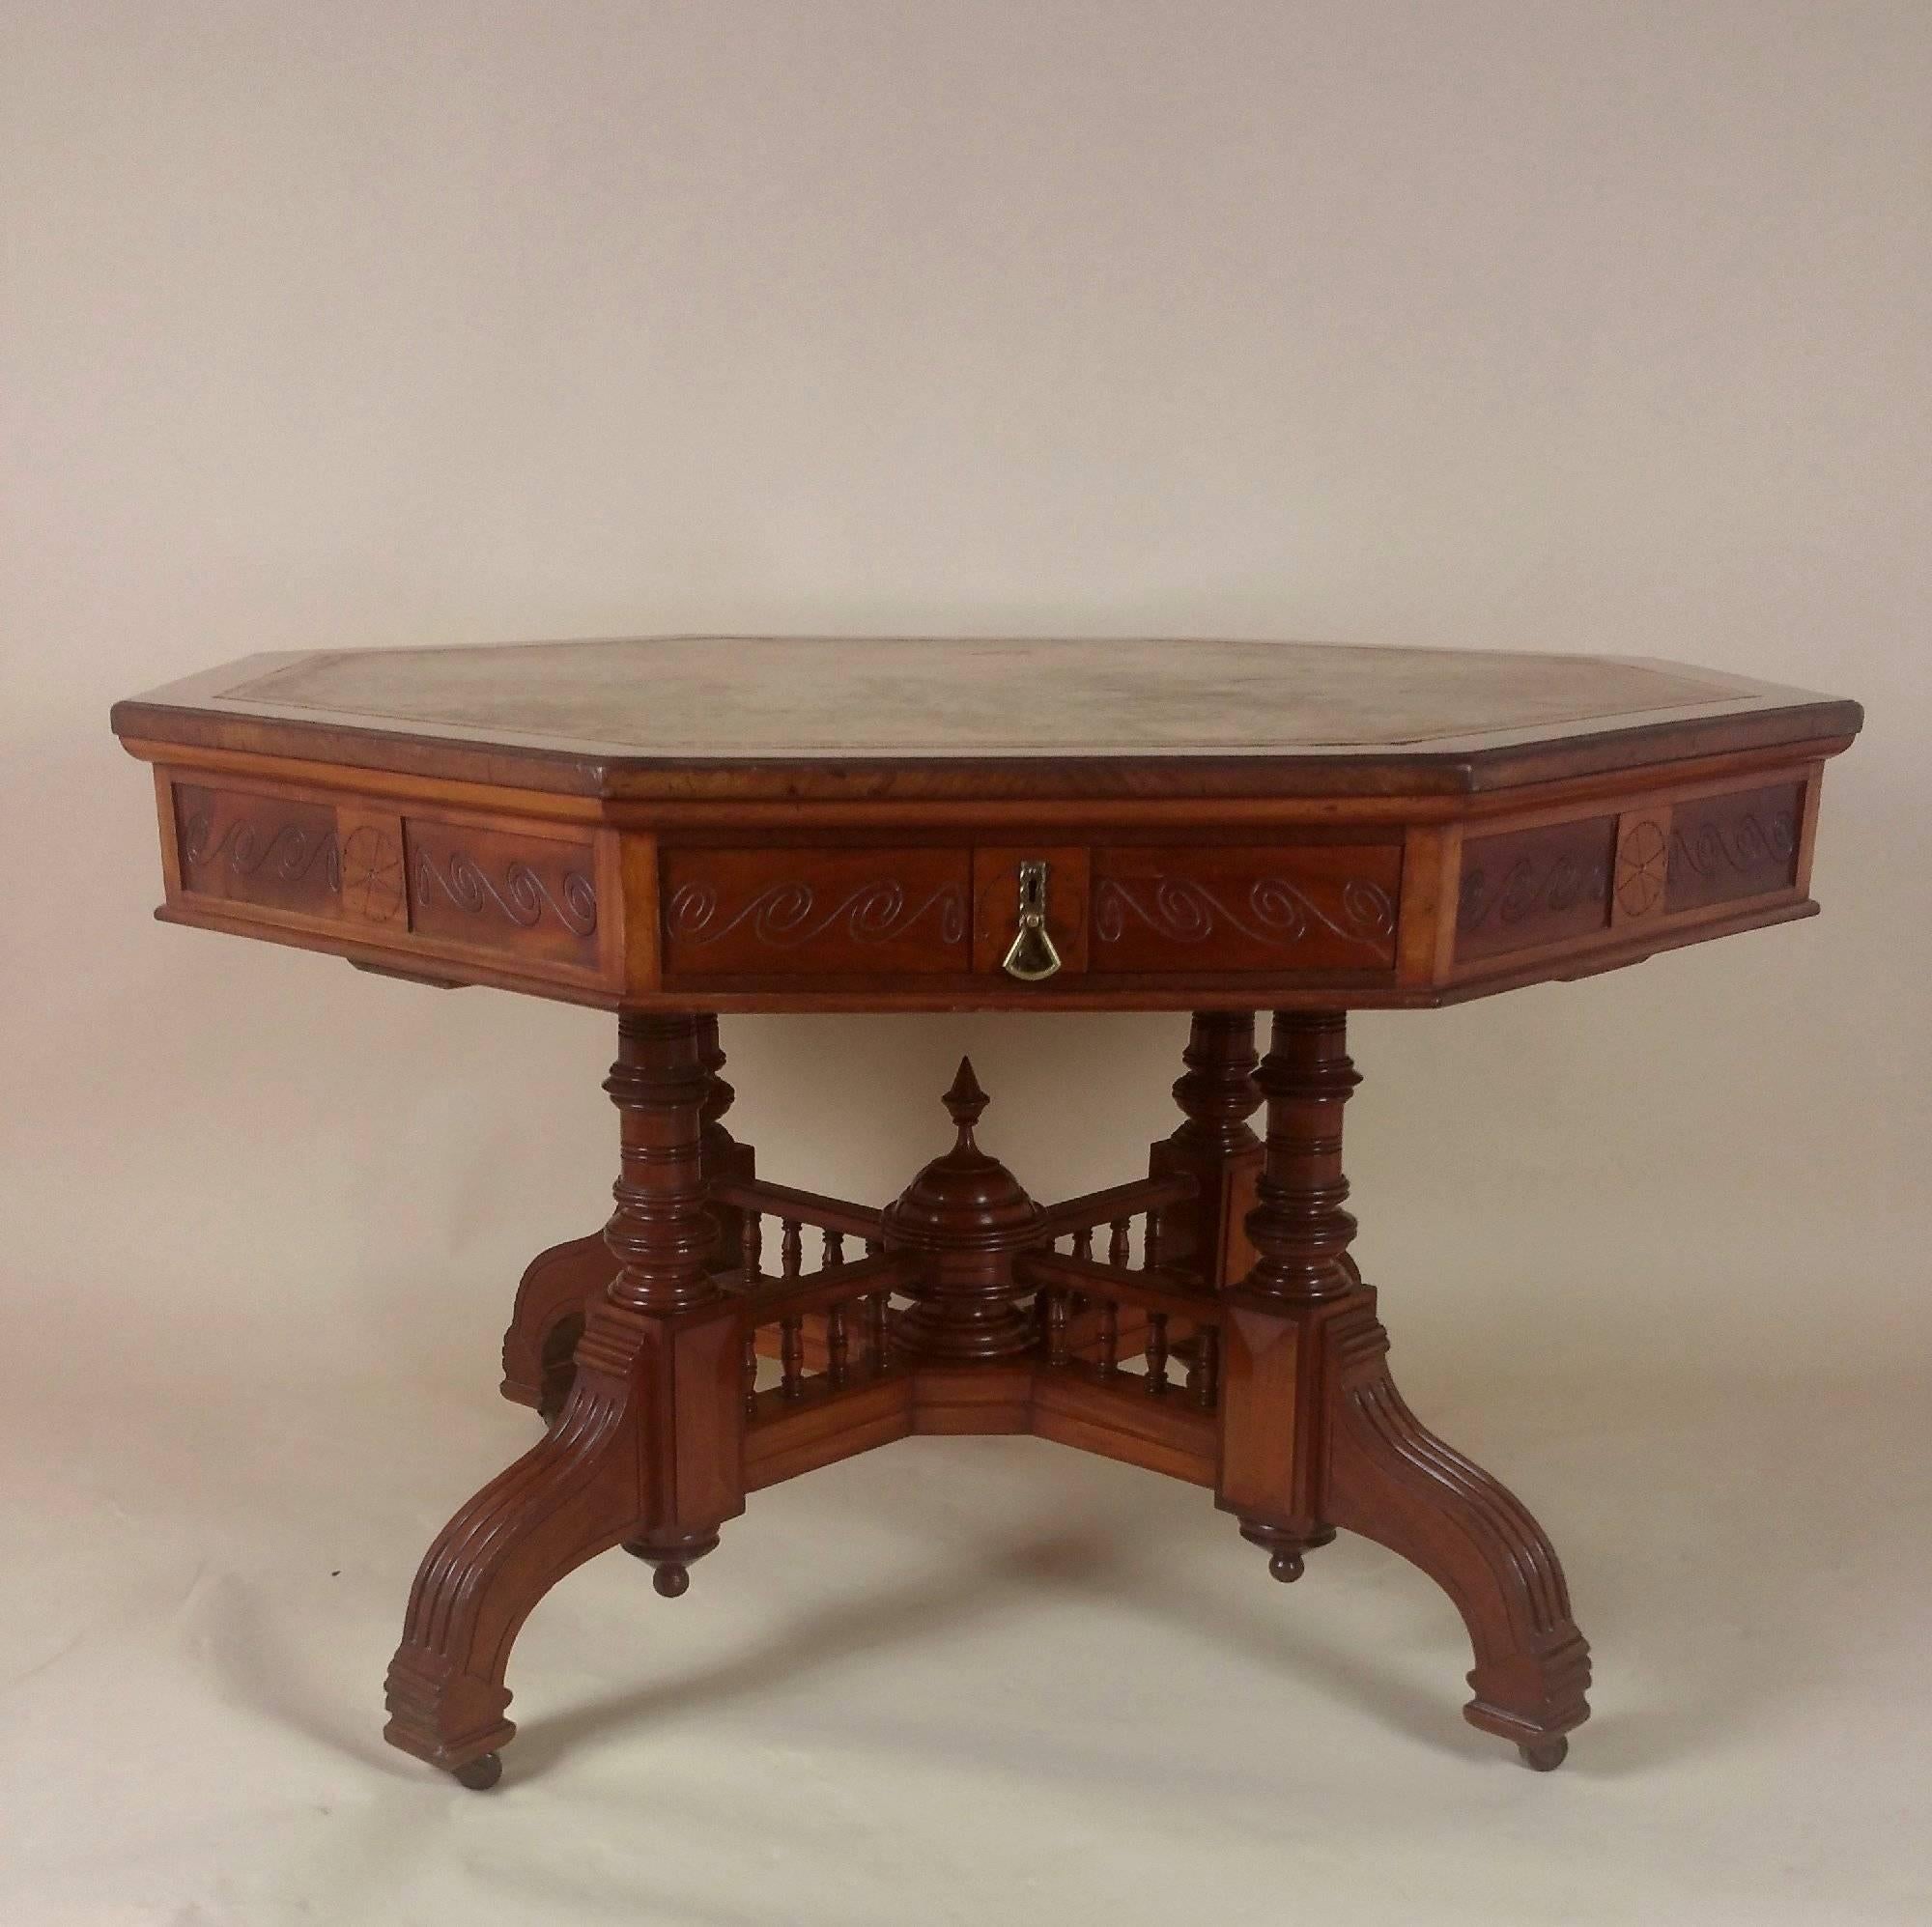 This excellent quality Victorian walnut octagonal Arts and Crafts library table features the original leather top and is stamped Maple and Co., a well-known and highly regarded cabinet maker of the period. The table is supported on an elaborately